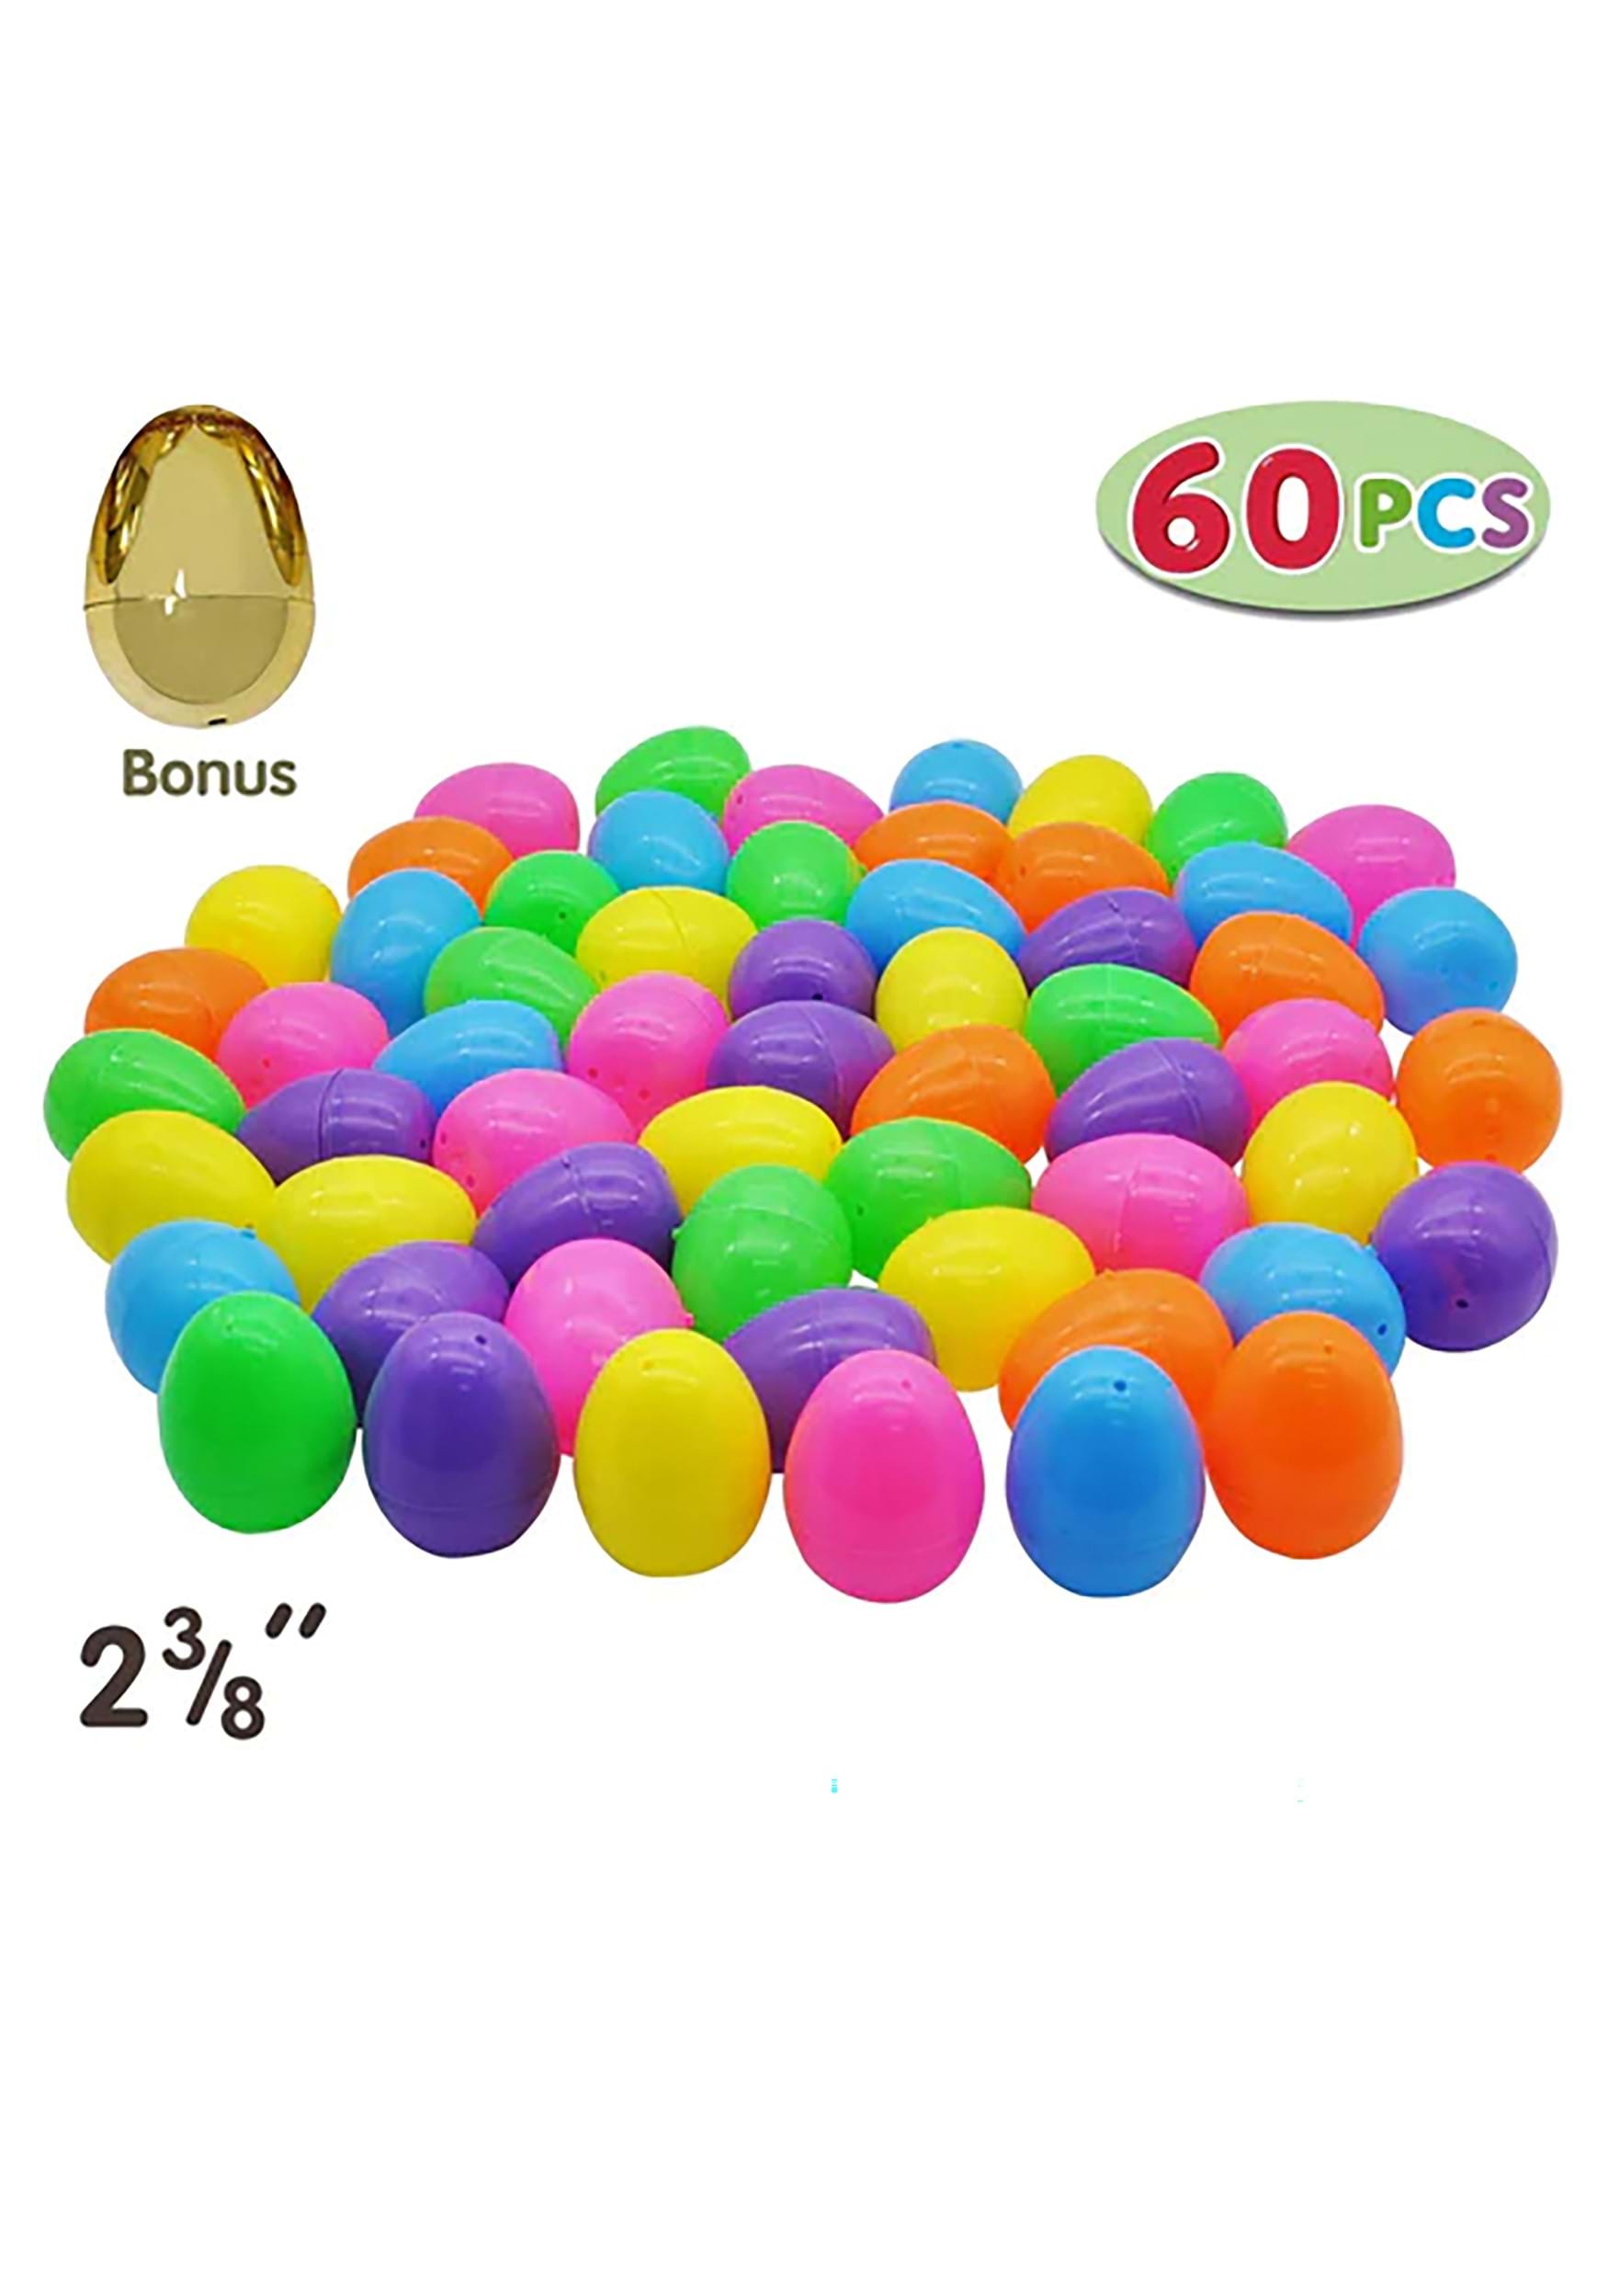 60 pcs 2.4″ Traditional Colorful Eggs